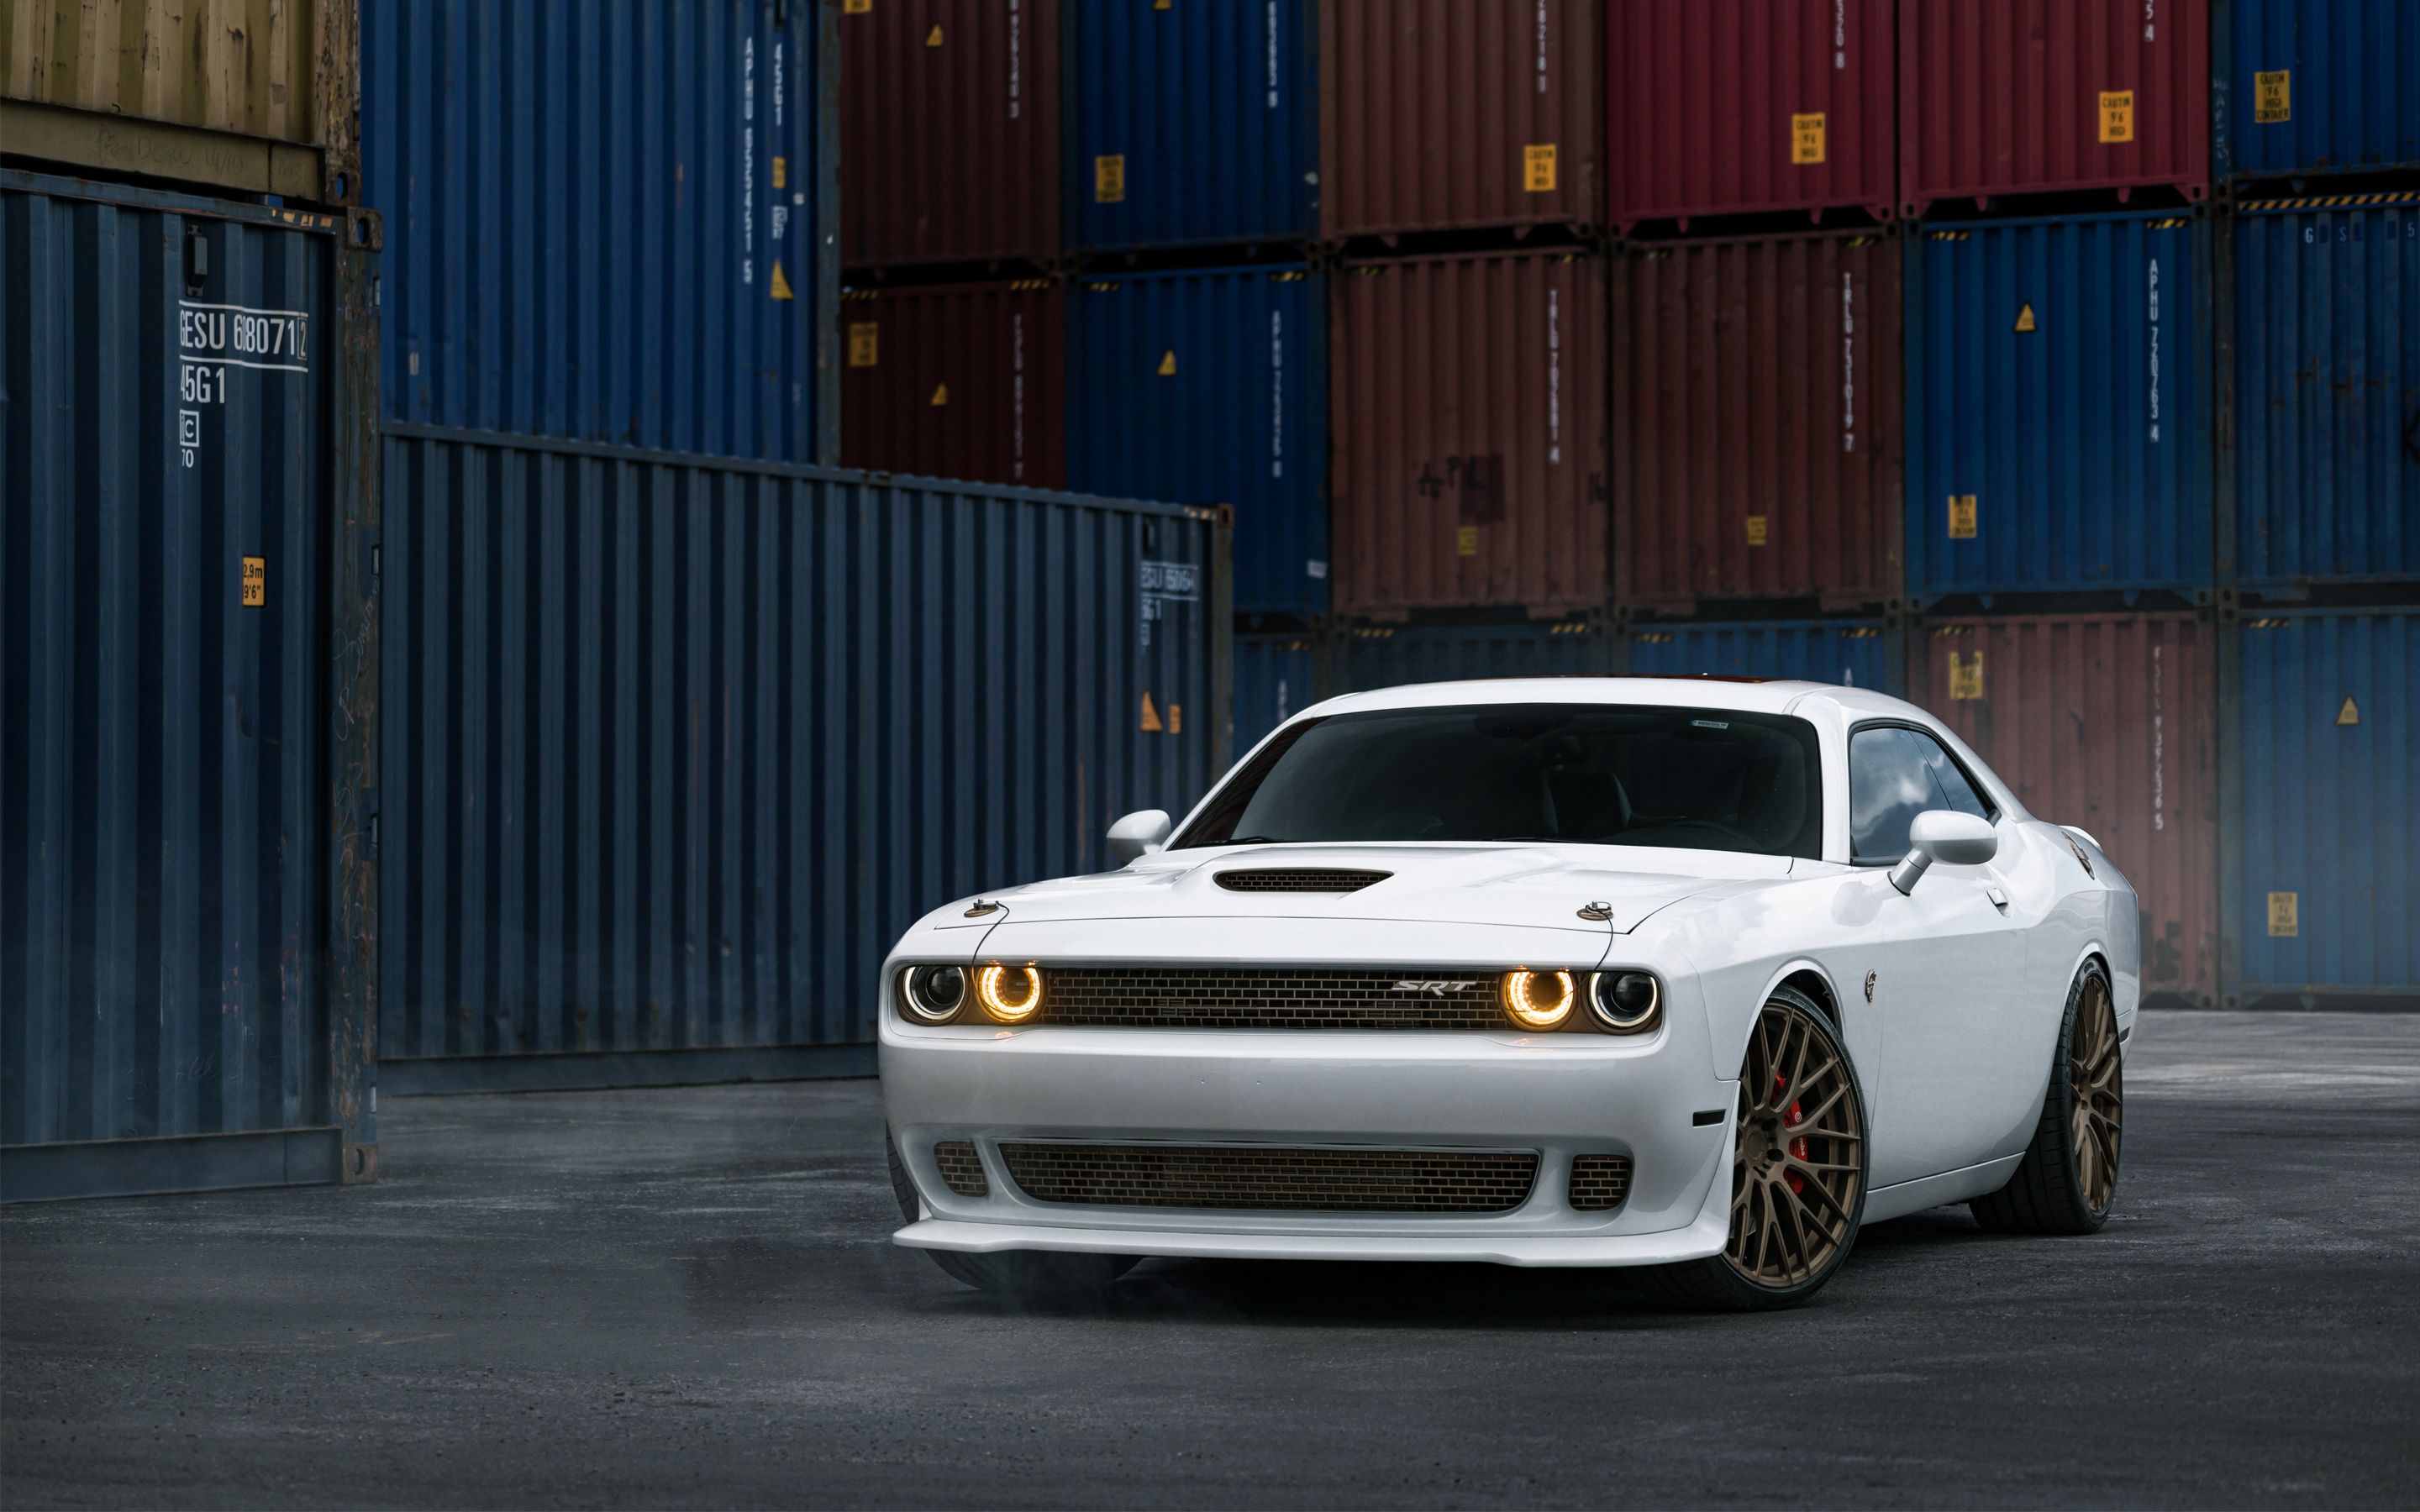 Dodge 4K wallpaper for your desktop or mobile screen free and easy to download